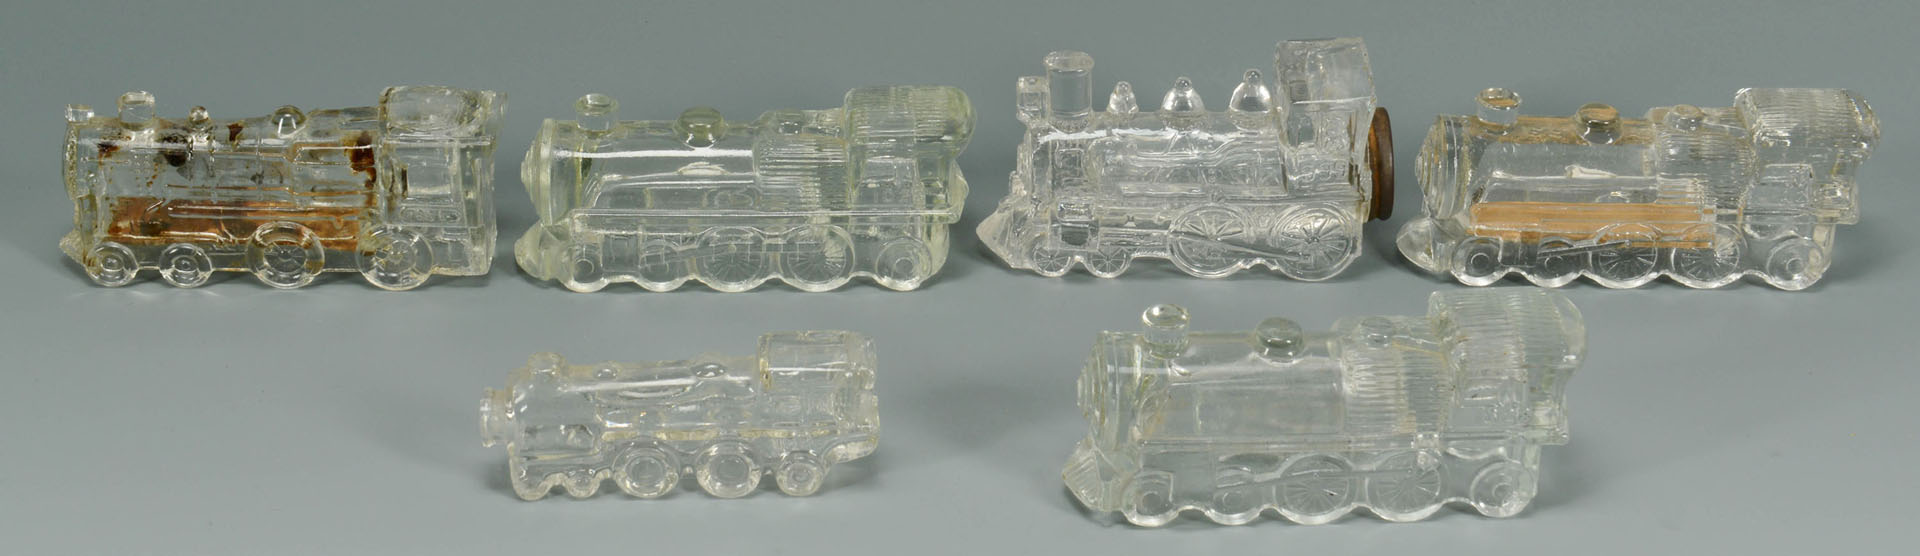 Lot 666: 32 American Glass Candy Containers